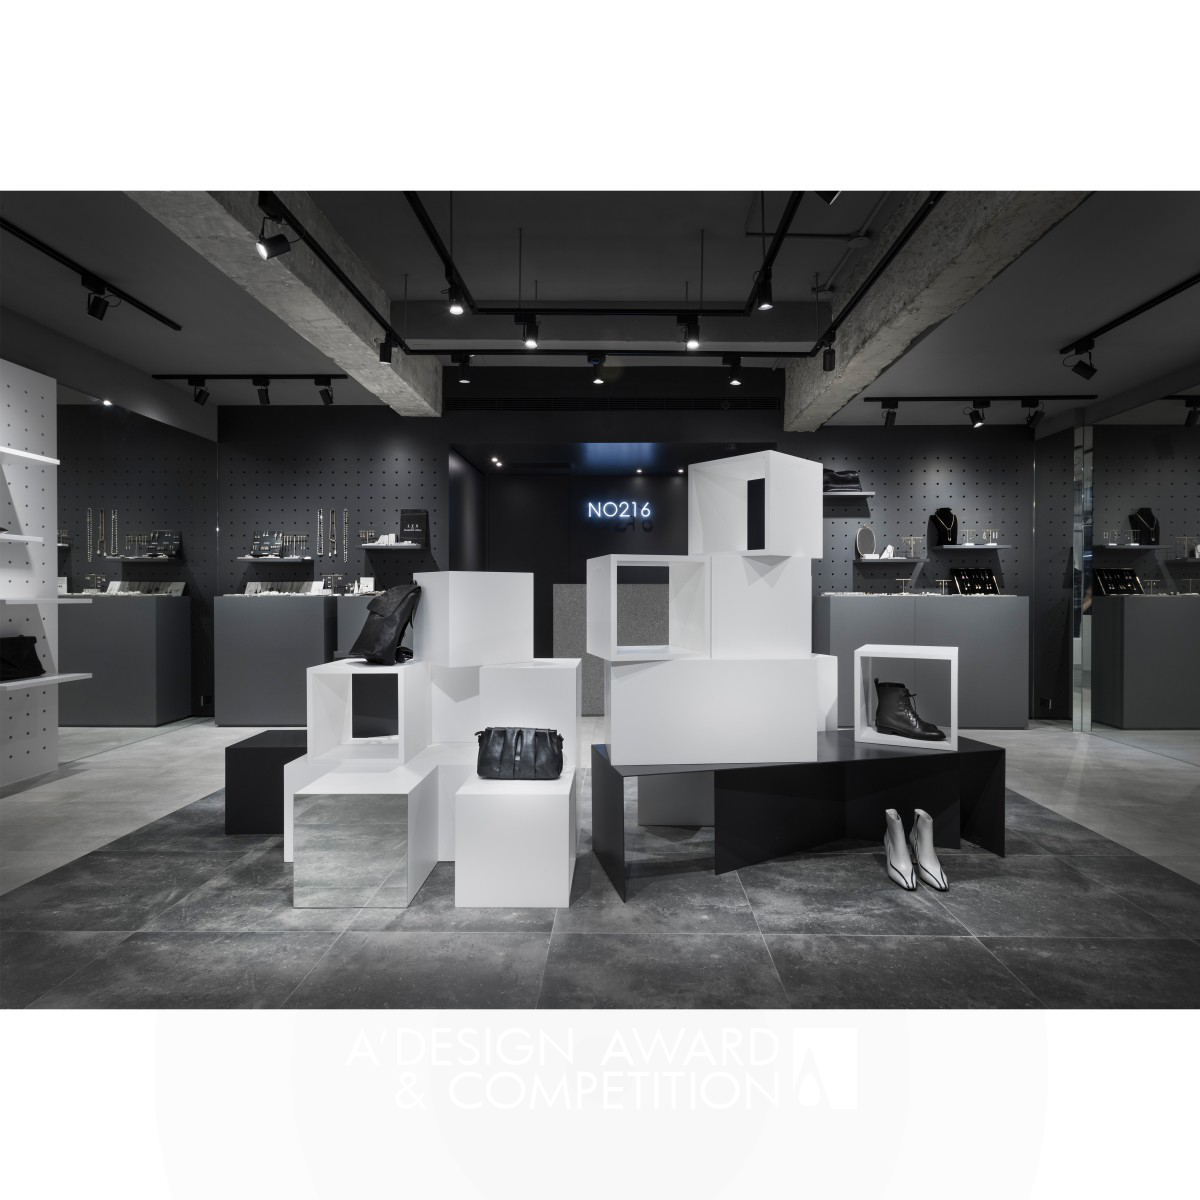 Molding Space Retail Display by Studio One